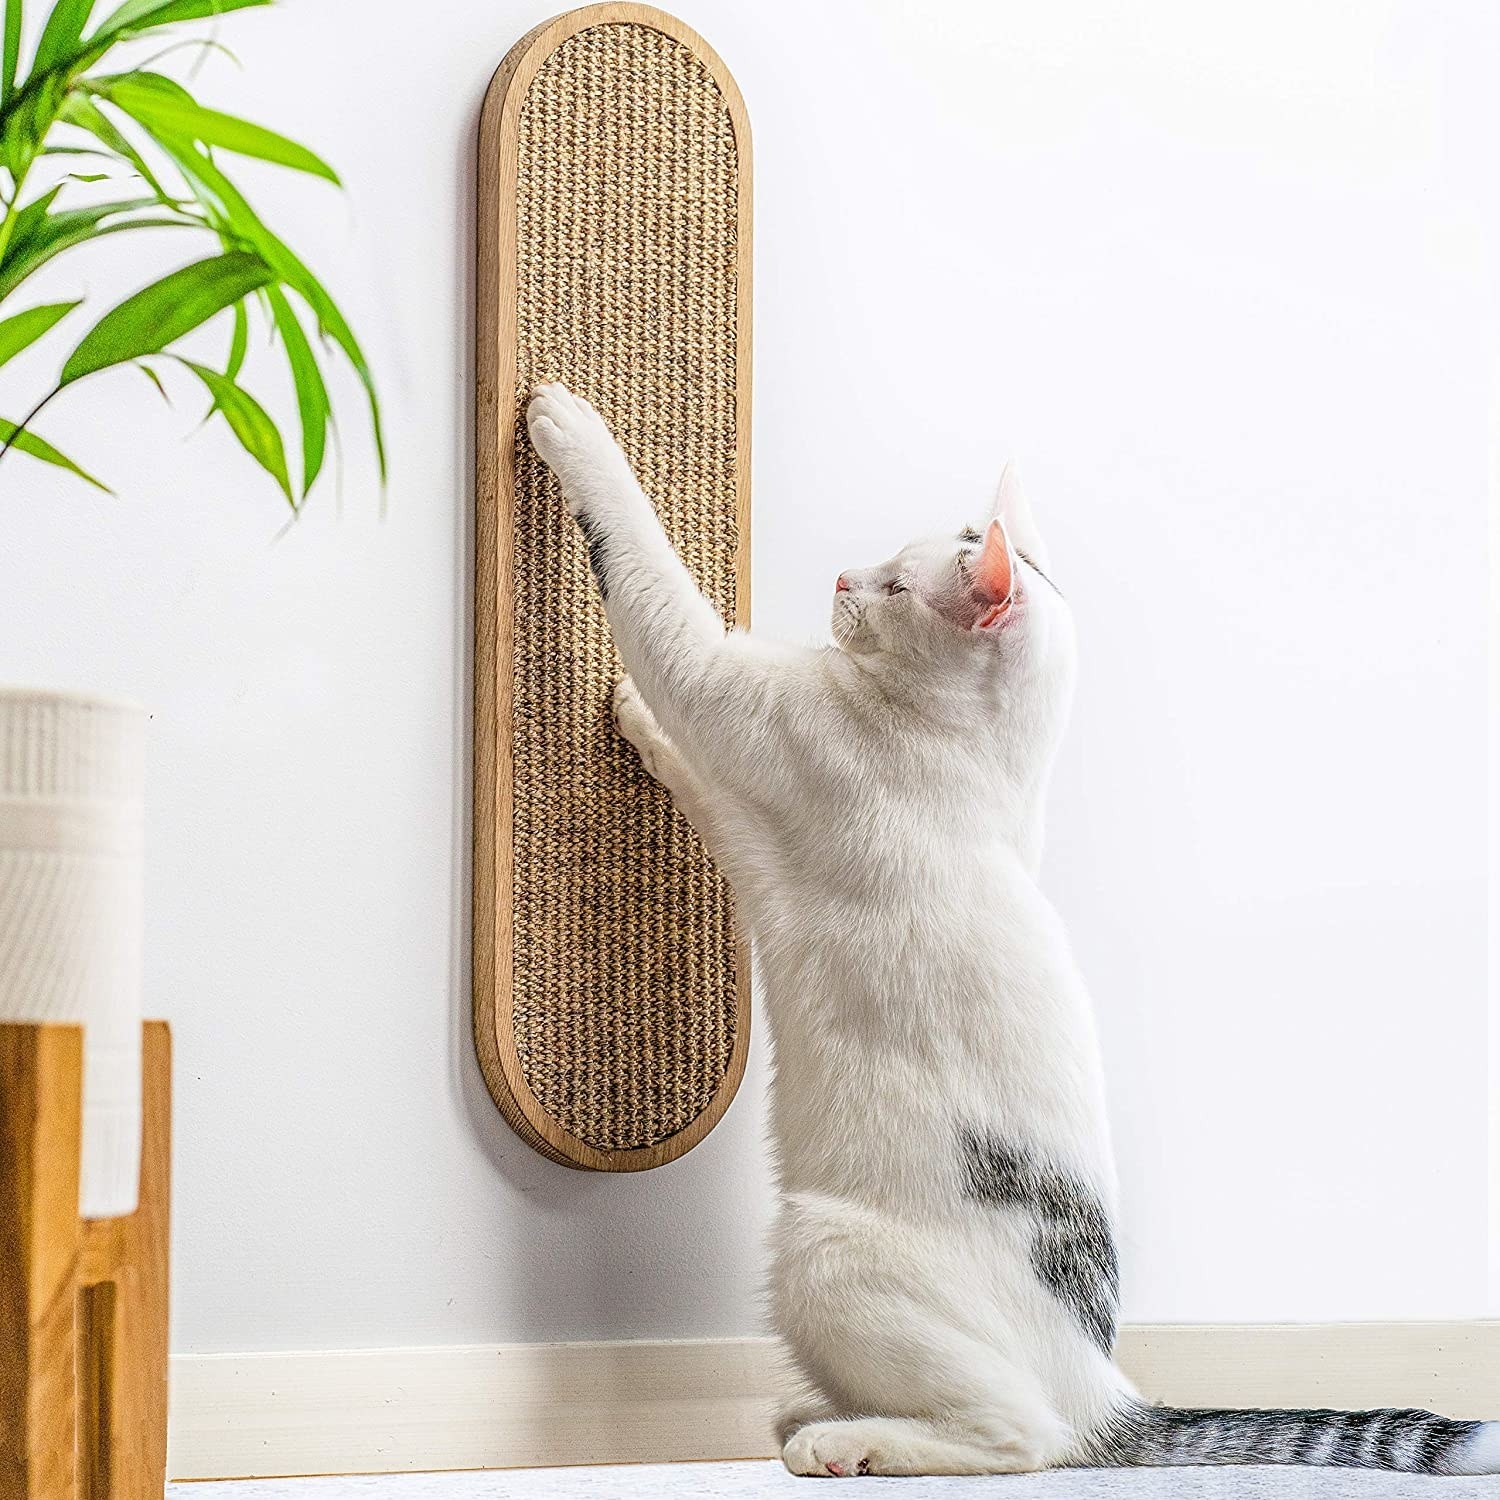 Say Goodbye To Cat-Related Stress With These 31 Useful Products